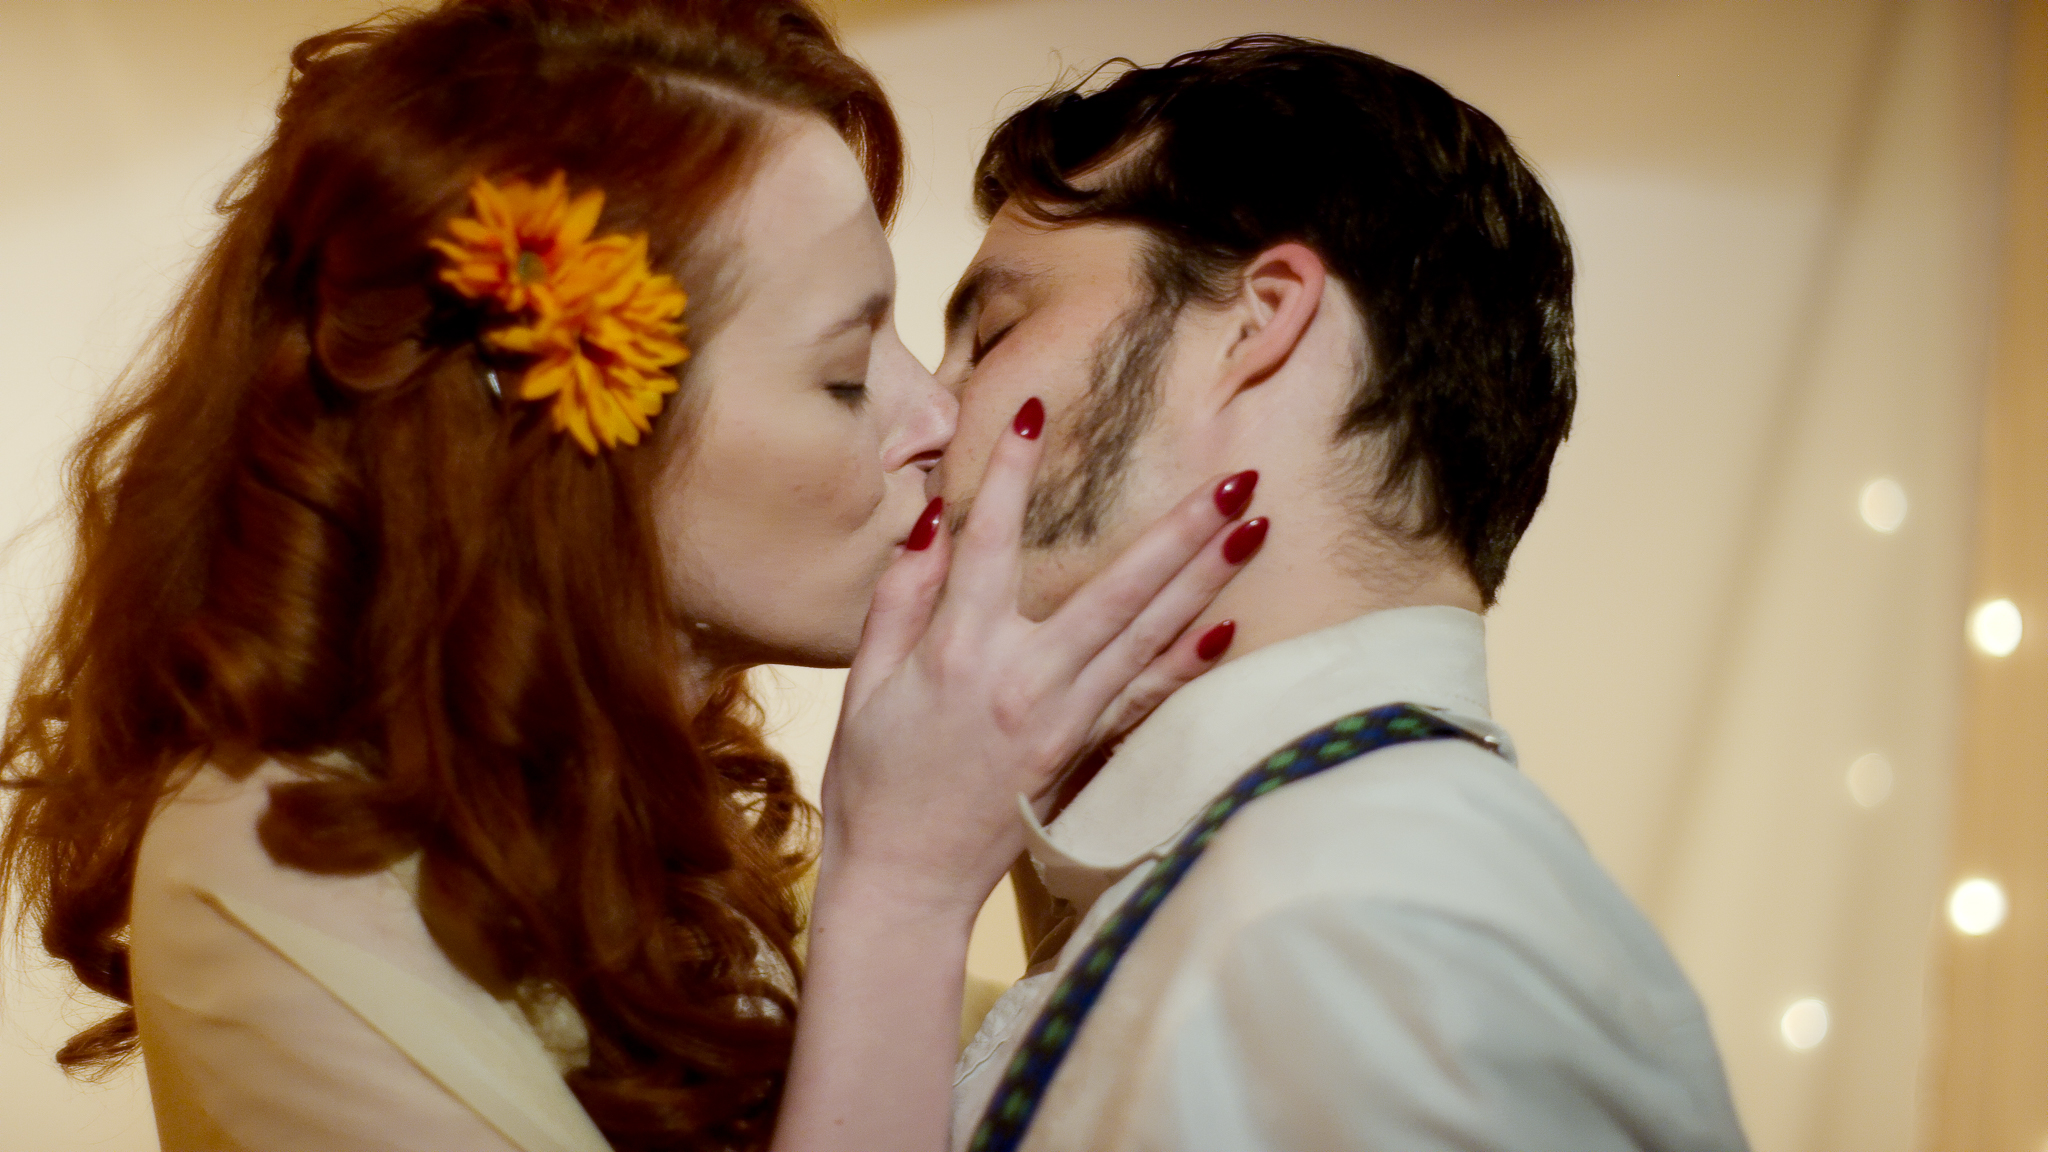 Woman with long red hair kisses man with sideburns in a yellow tented room.